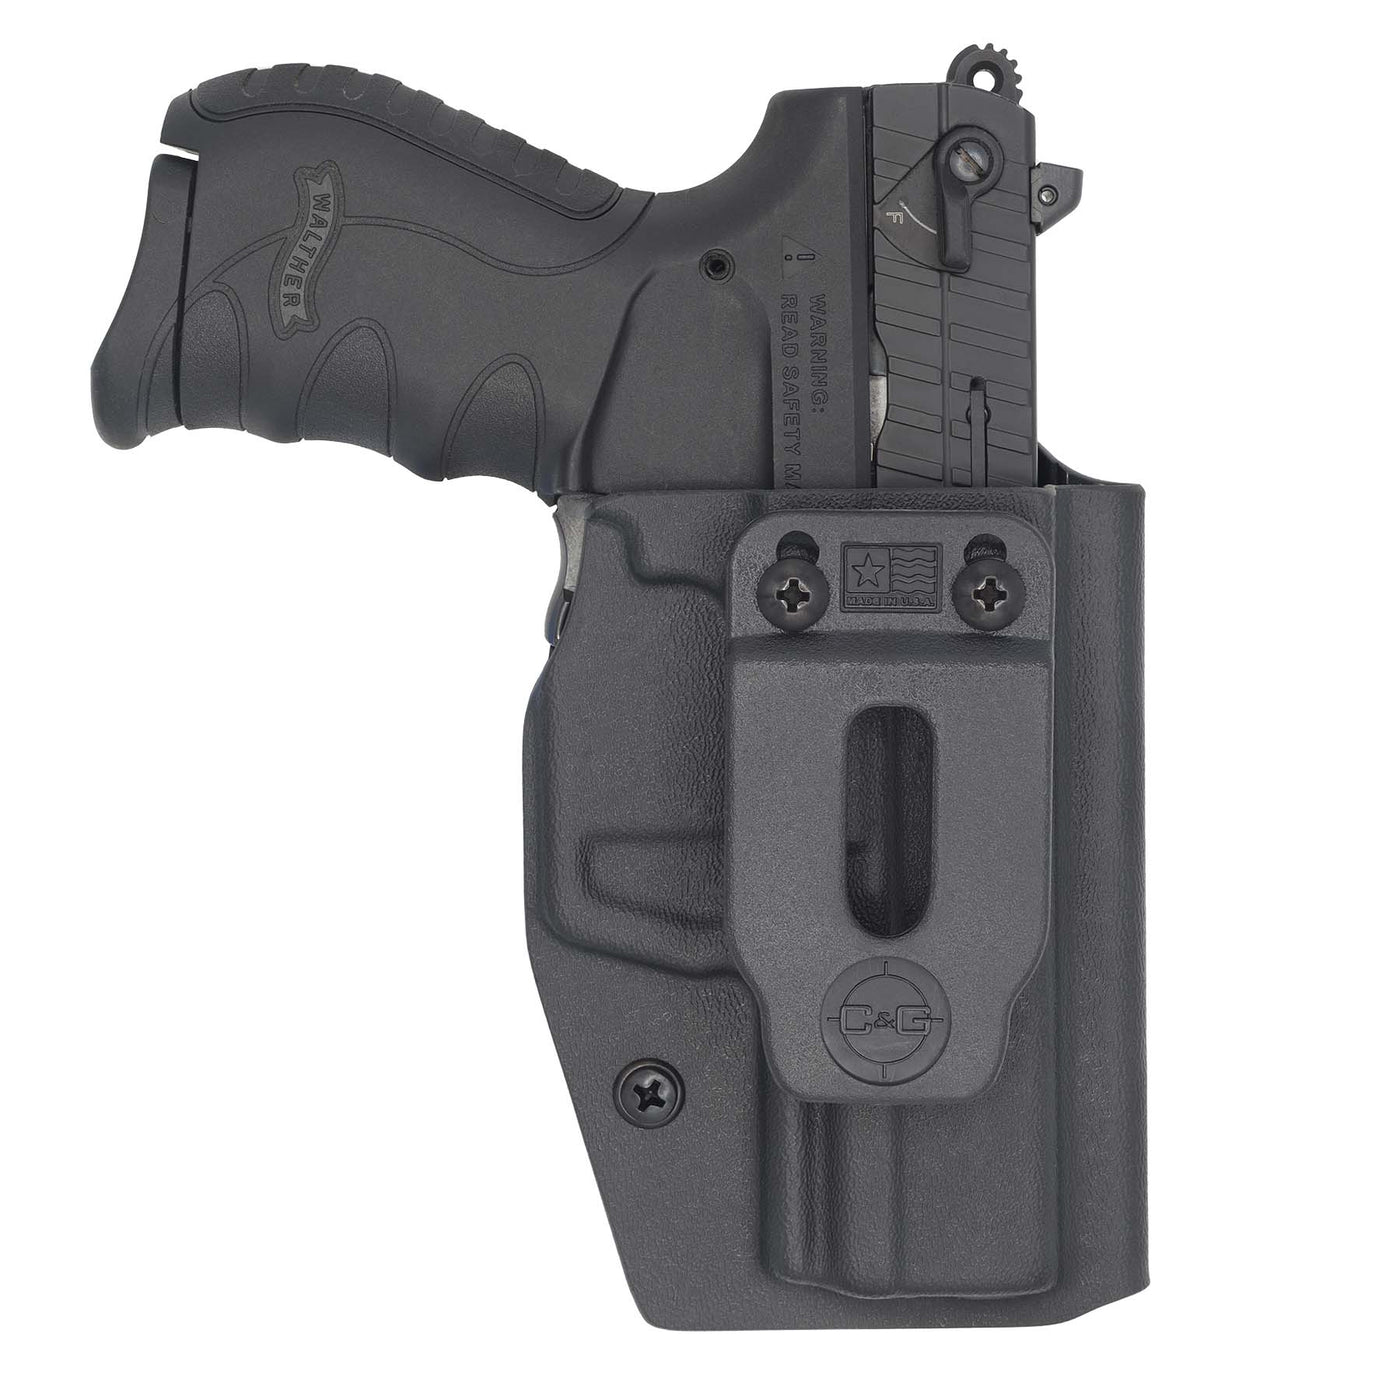 This is the C&G Holsters Covert series (IWB) inside the waistband Holster for the Walther PK380 with the gun right hand.